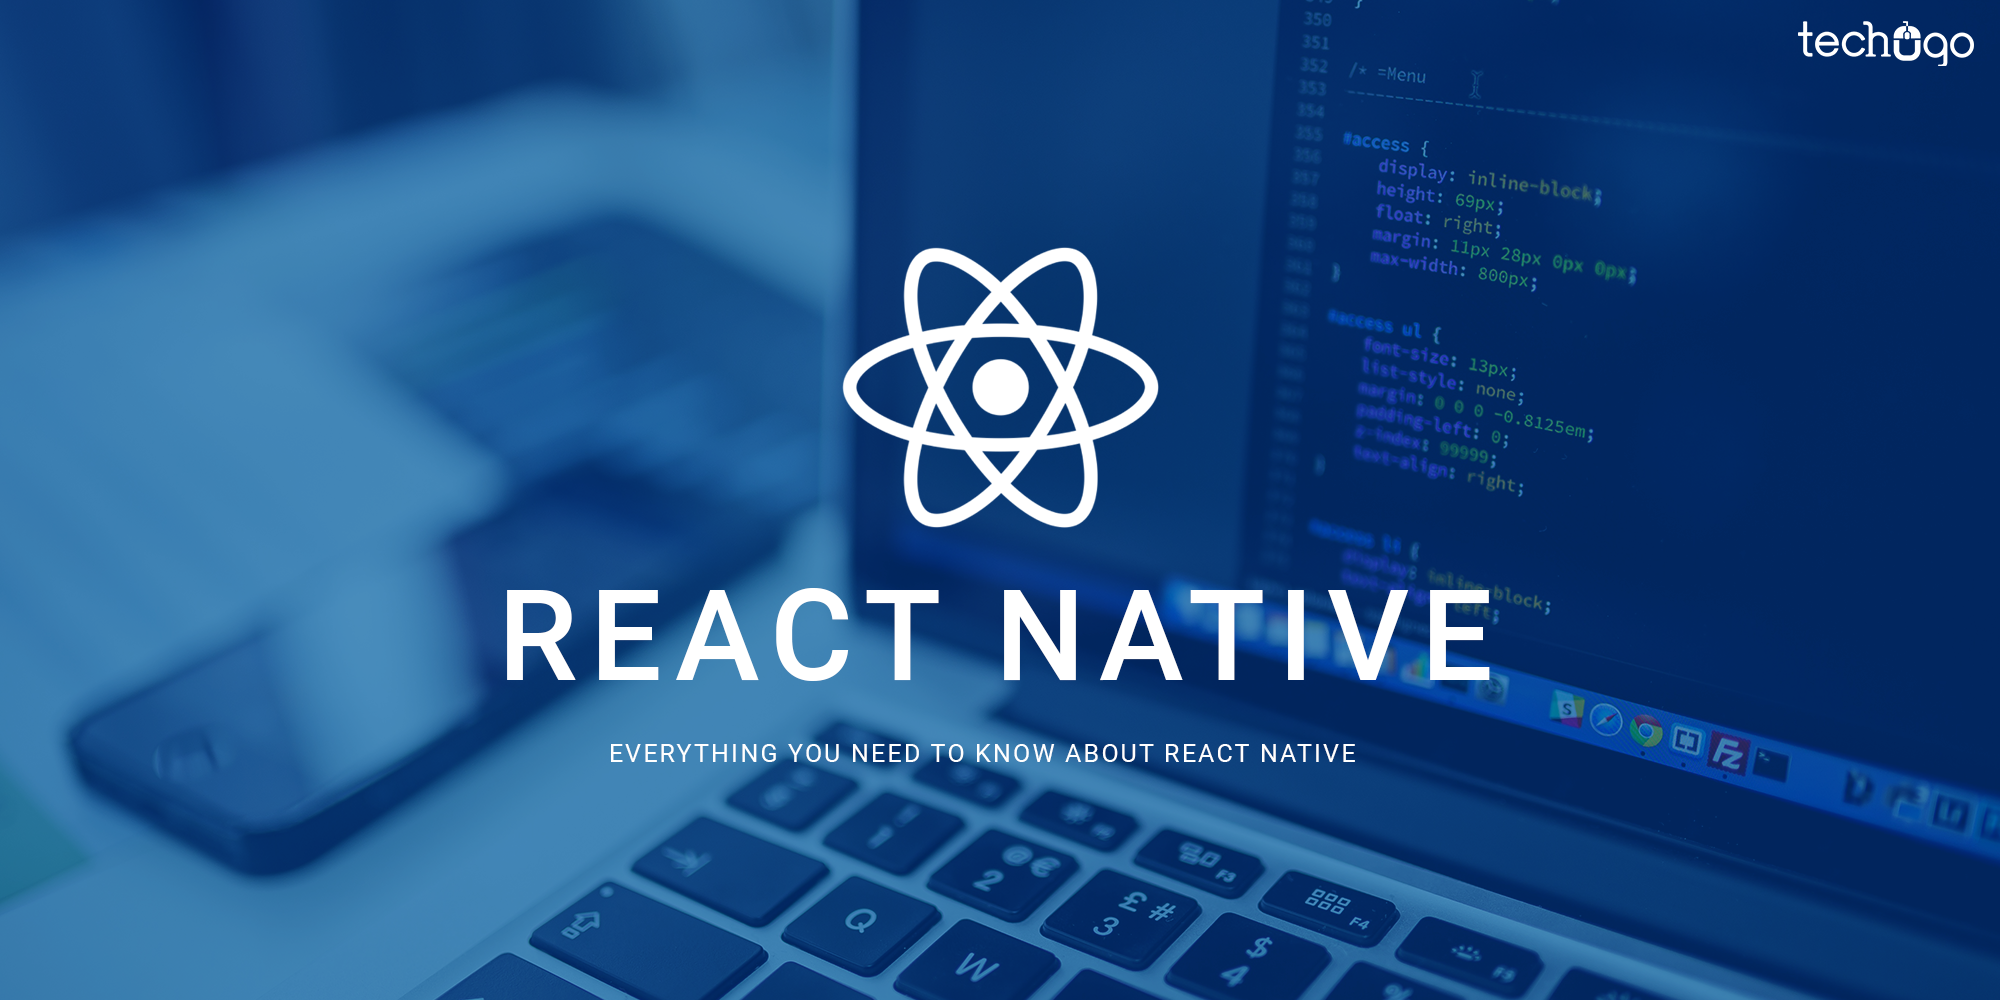 Everything You Need To Know About React Native